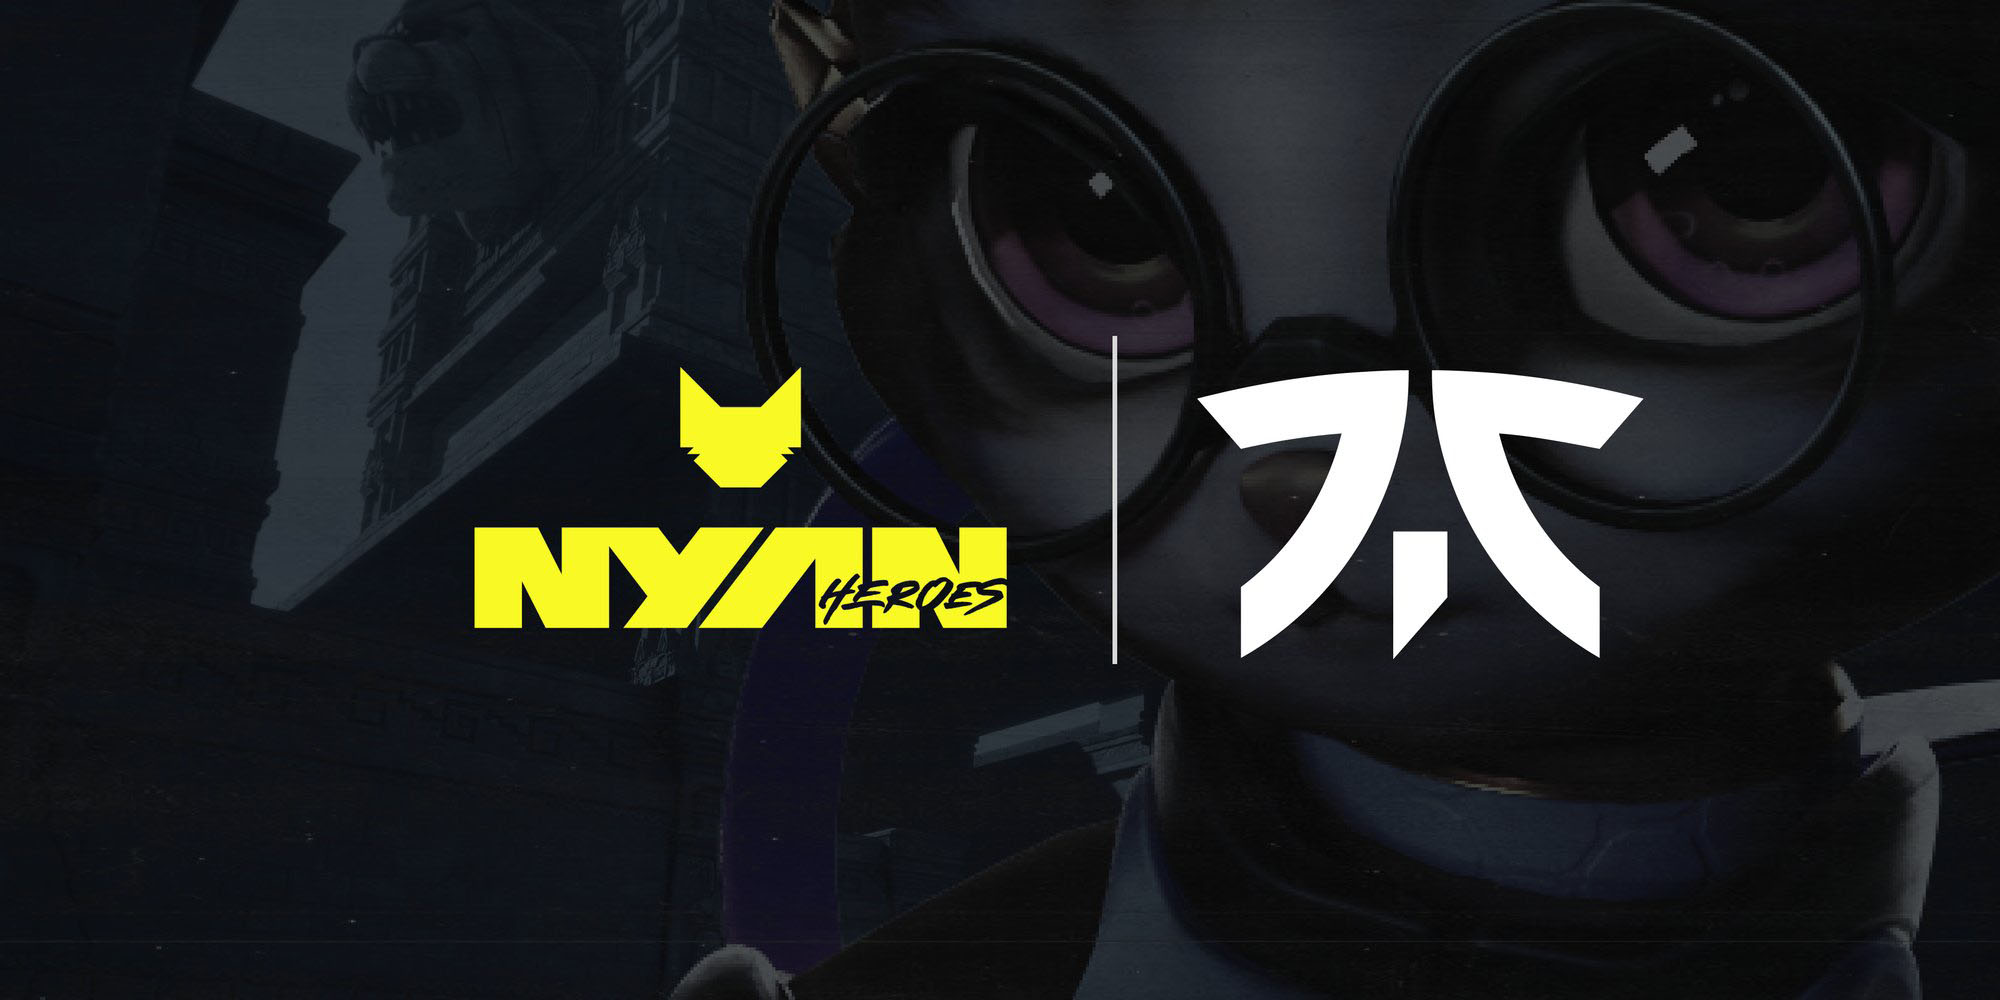 Fnatic signs partnership deal to promote Nyan Heroes